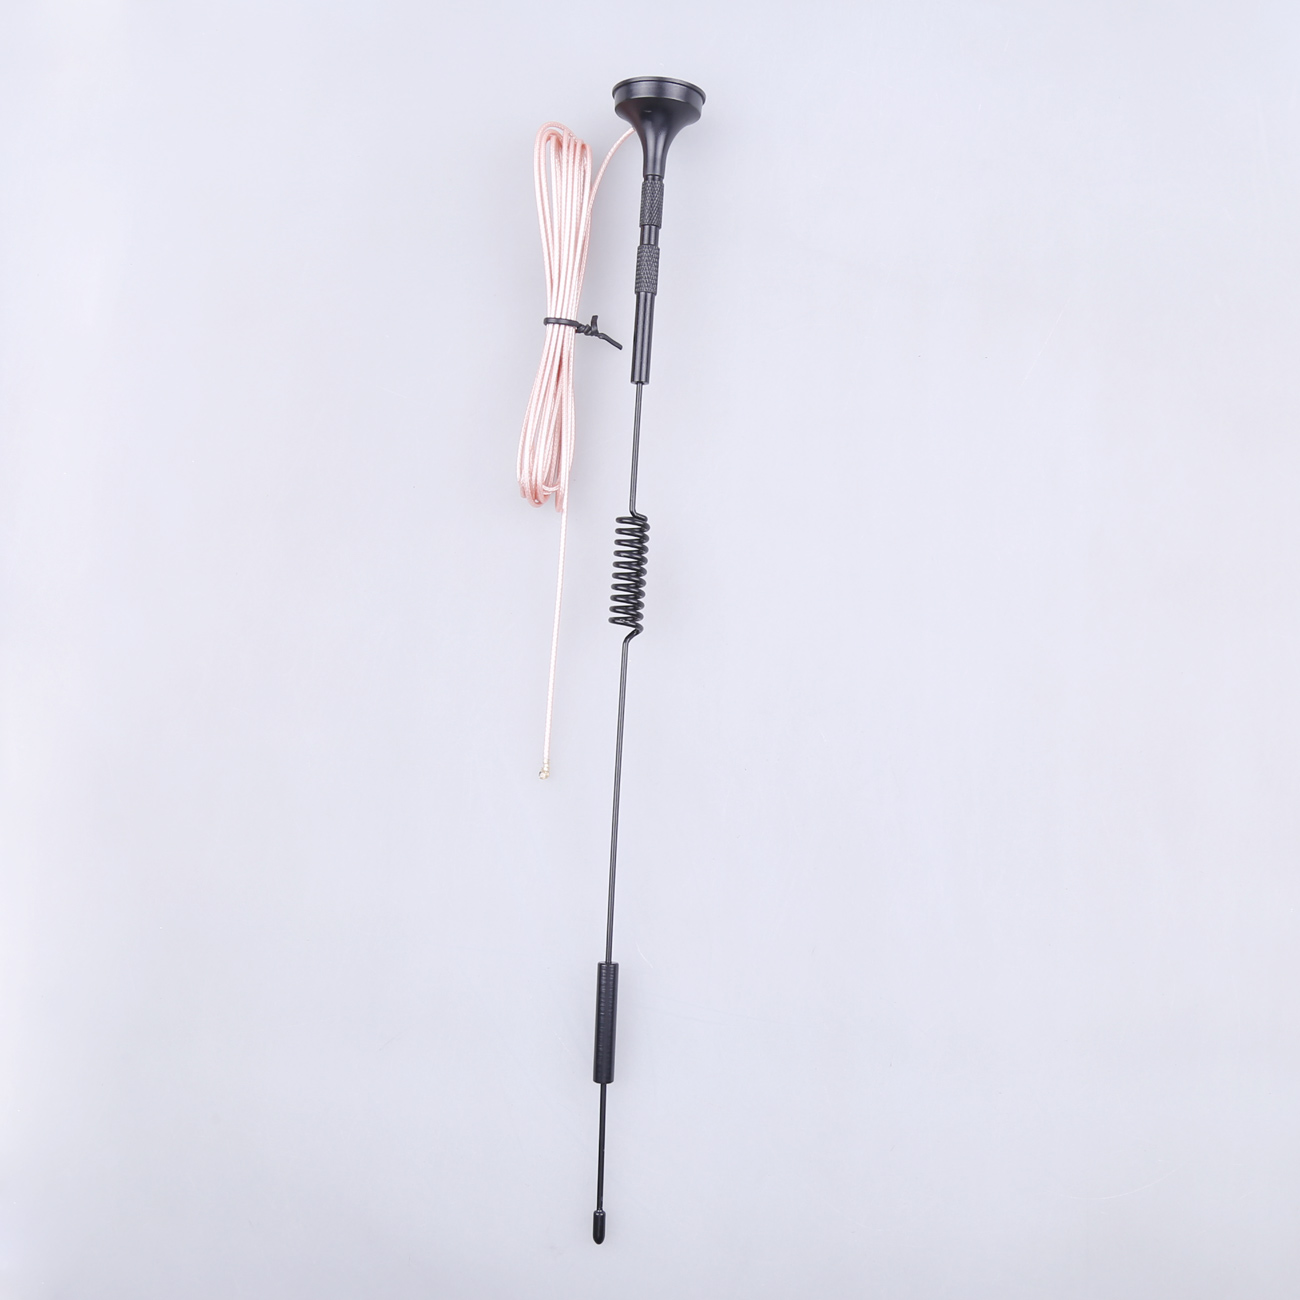 Kinghelm Antenna 4G external suction cup spring antenna 12dB, 178 wire l  3M, Ipex connector - KH1NB (4G) C3600-03-A3